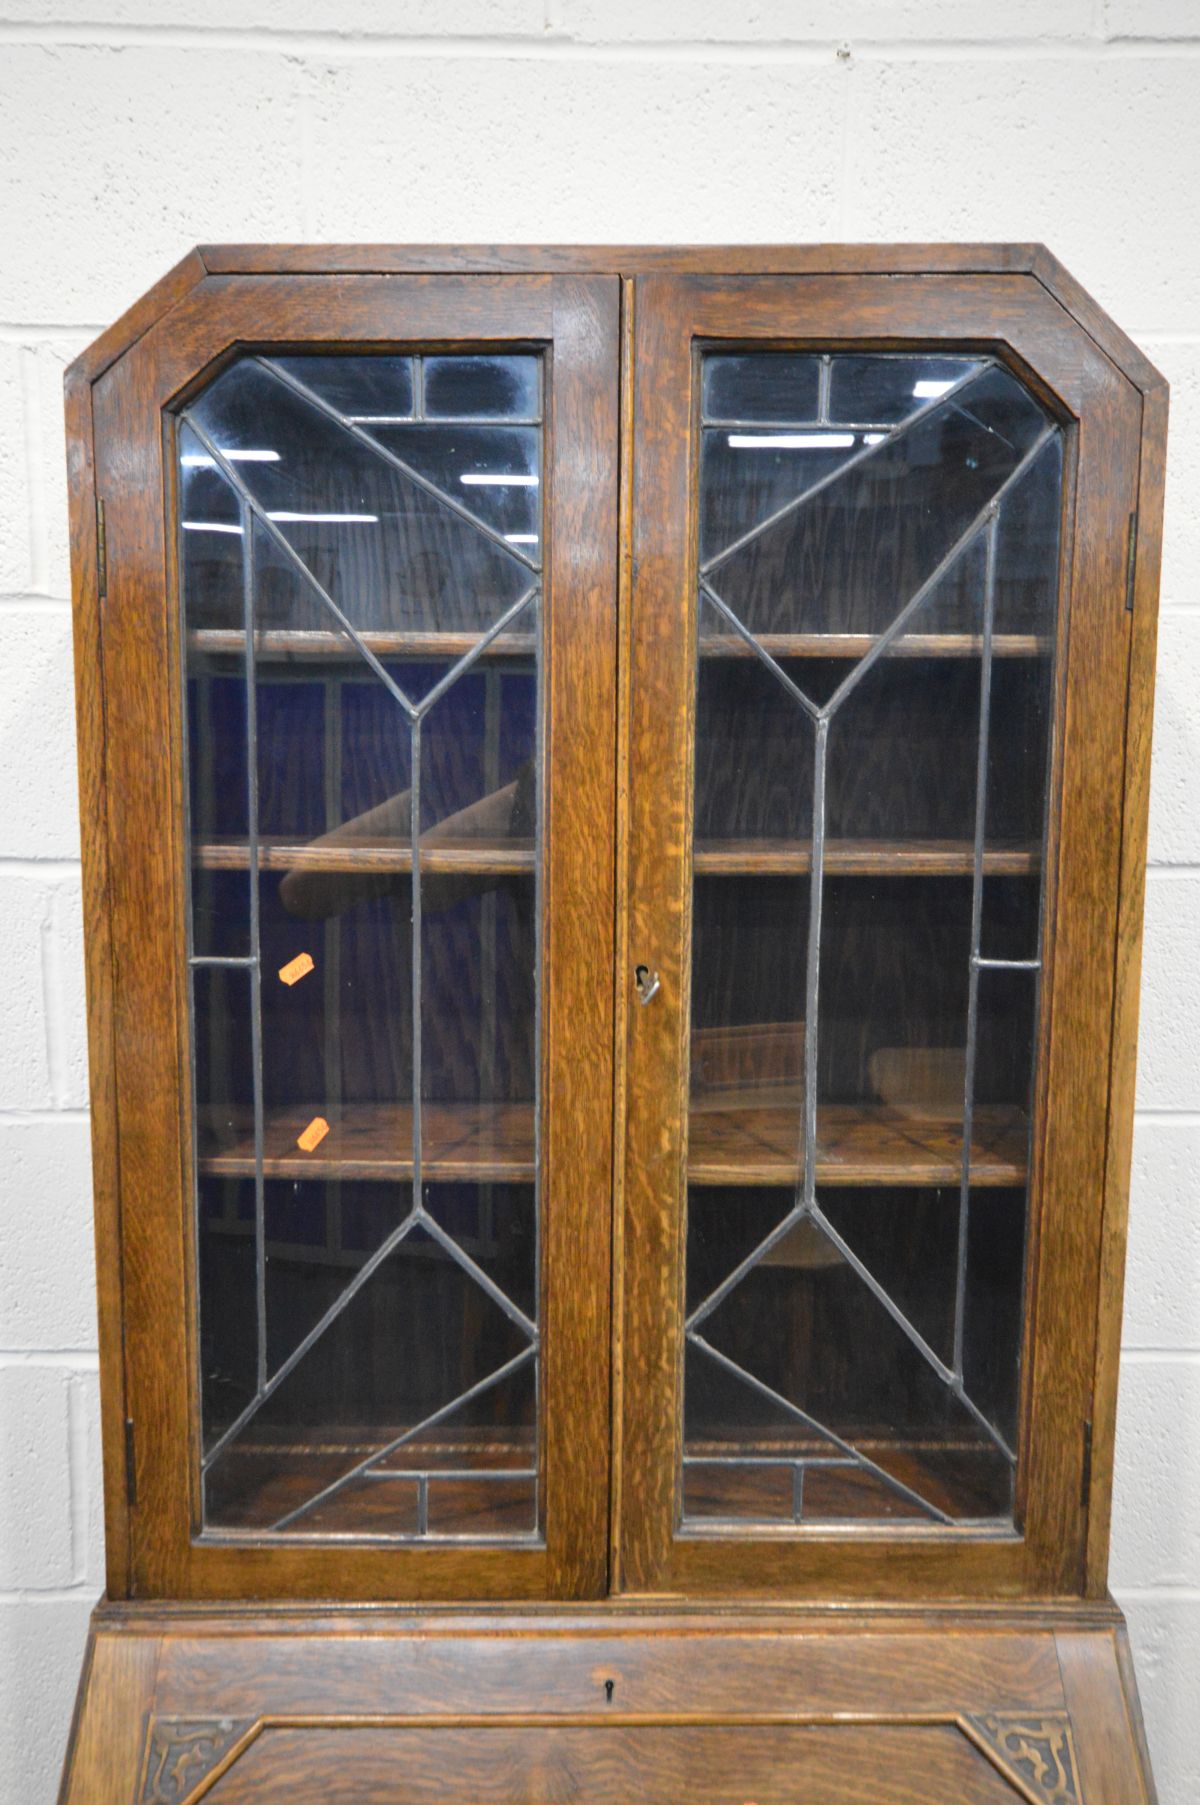 A EARLY TO MID 20TH CENTURY OAK BUREAU BOOKCASE, the top section with Art Deco lead glazed doors, - Image 3 of 3